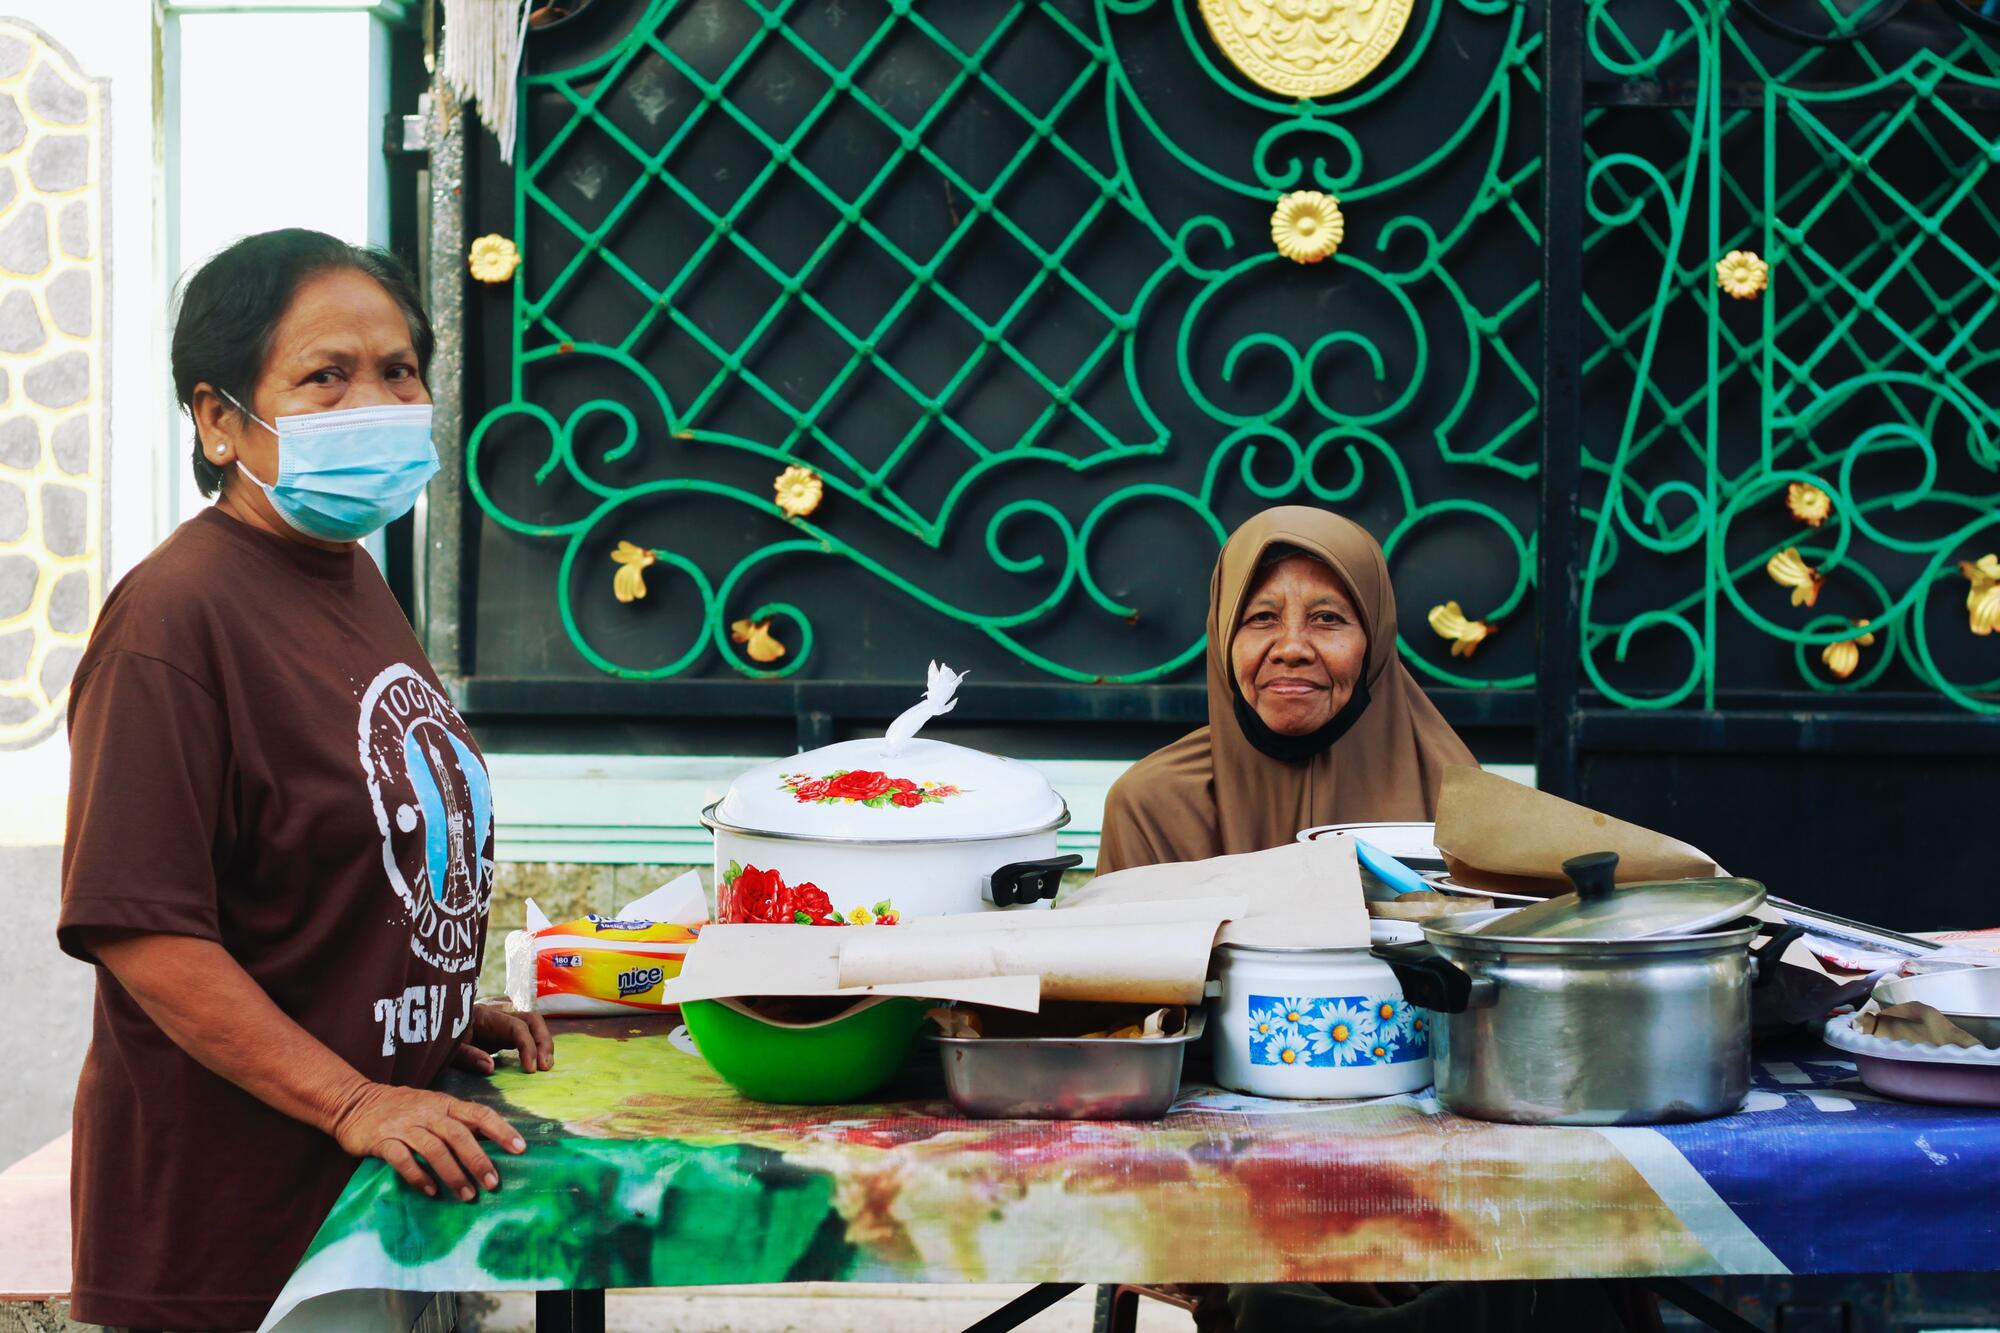 Two Indonesian women at the camera. One is sitting behind a market table, wearing an abaya and a surgical mask pulled under her chin; the other is standing next to the table, wearing a graphic tee and with a surgical mask over her face.